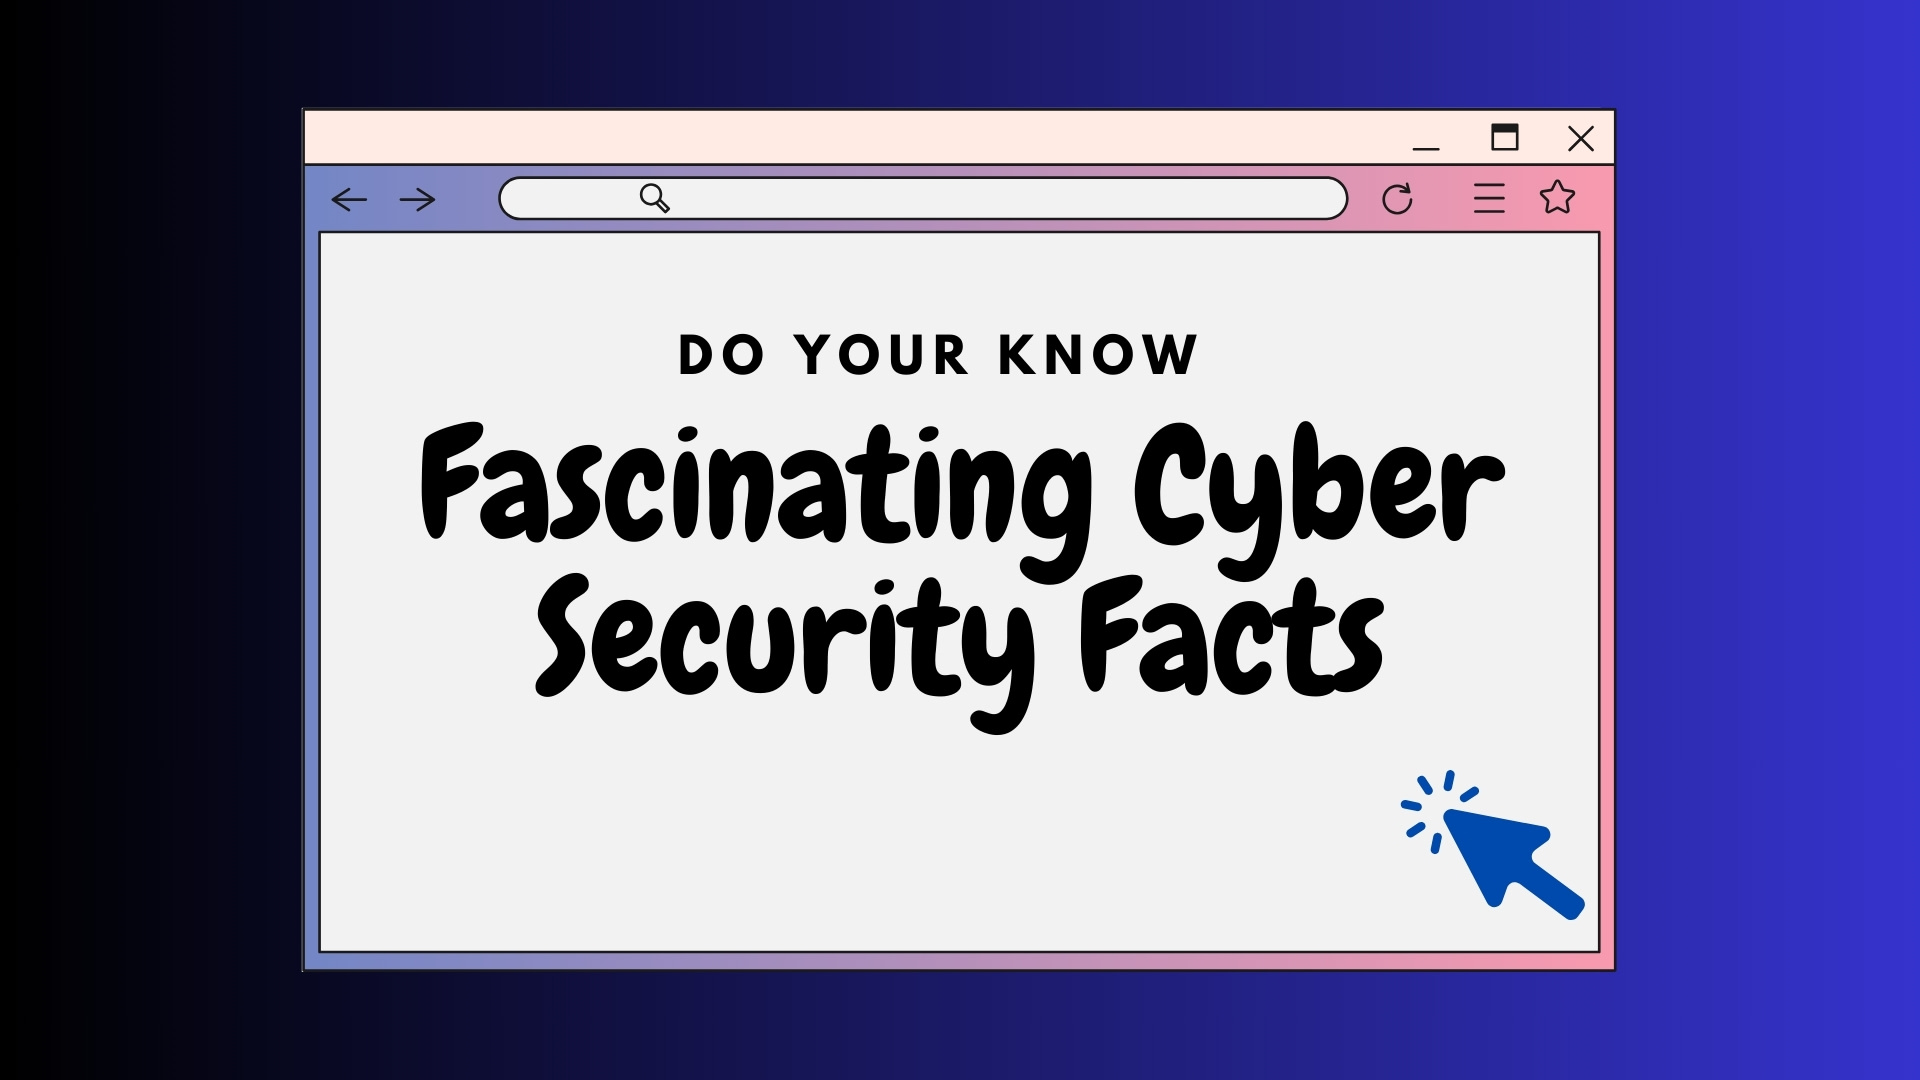 Fascinating Cyber Security Facts